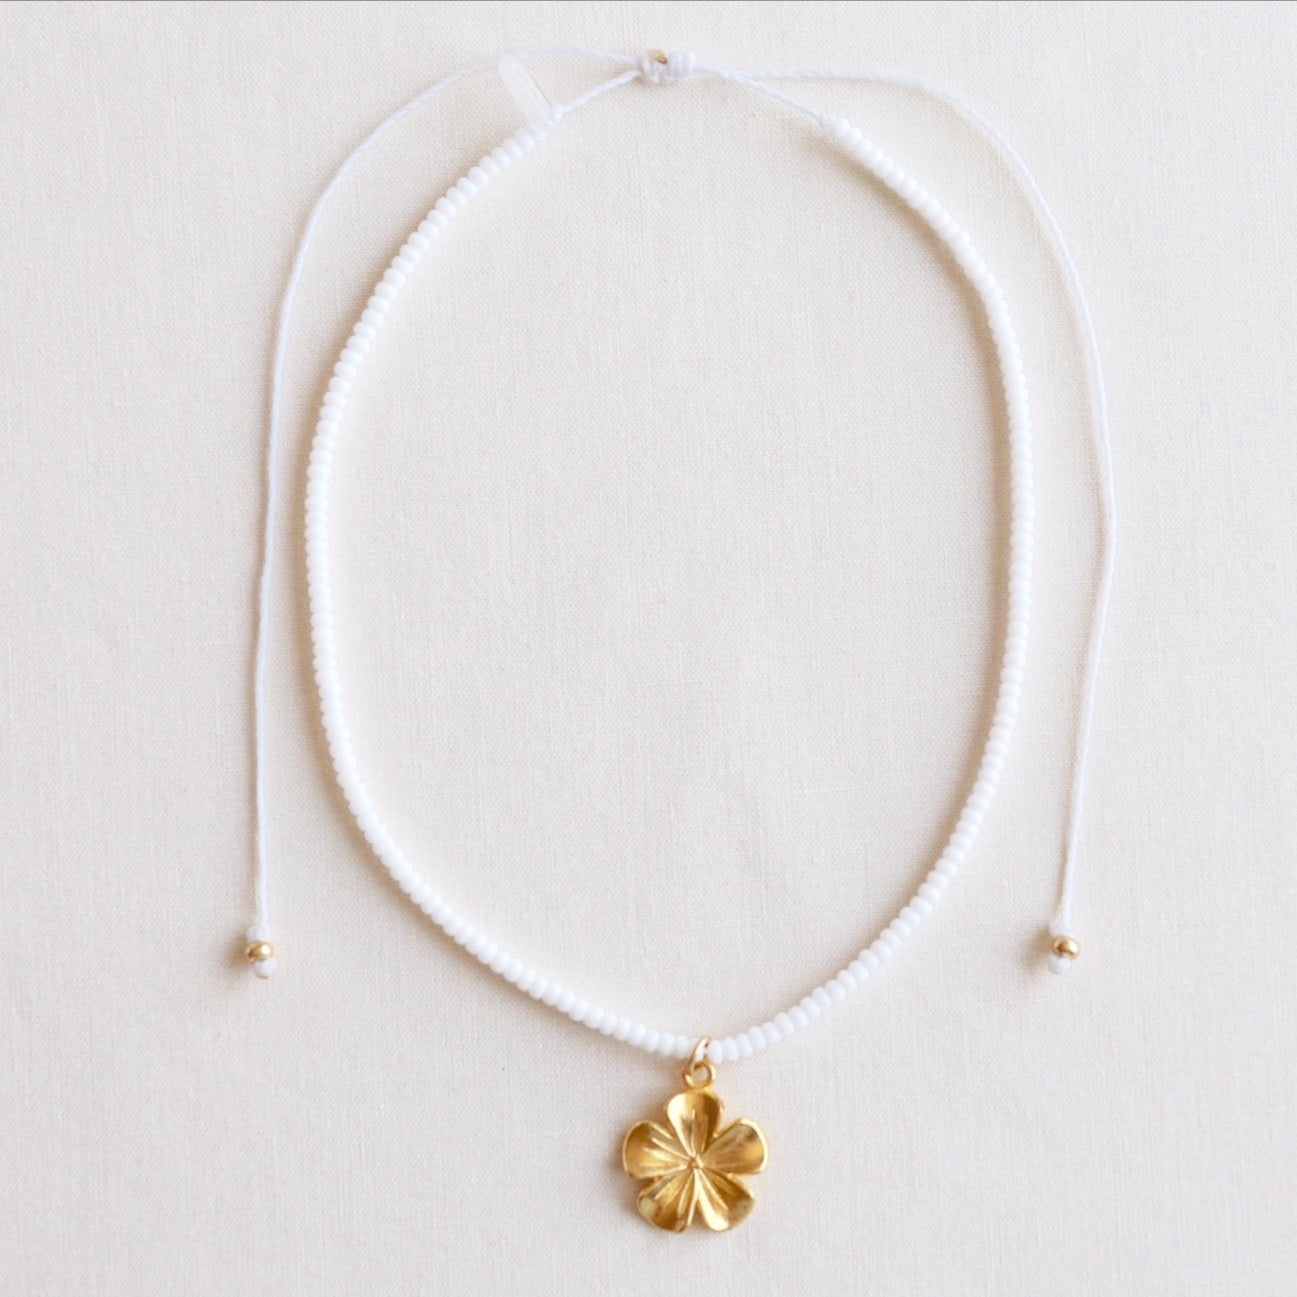 Golden Plumeria Limited Edition Waterproof Necklace